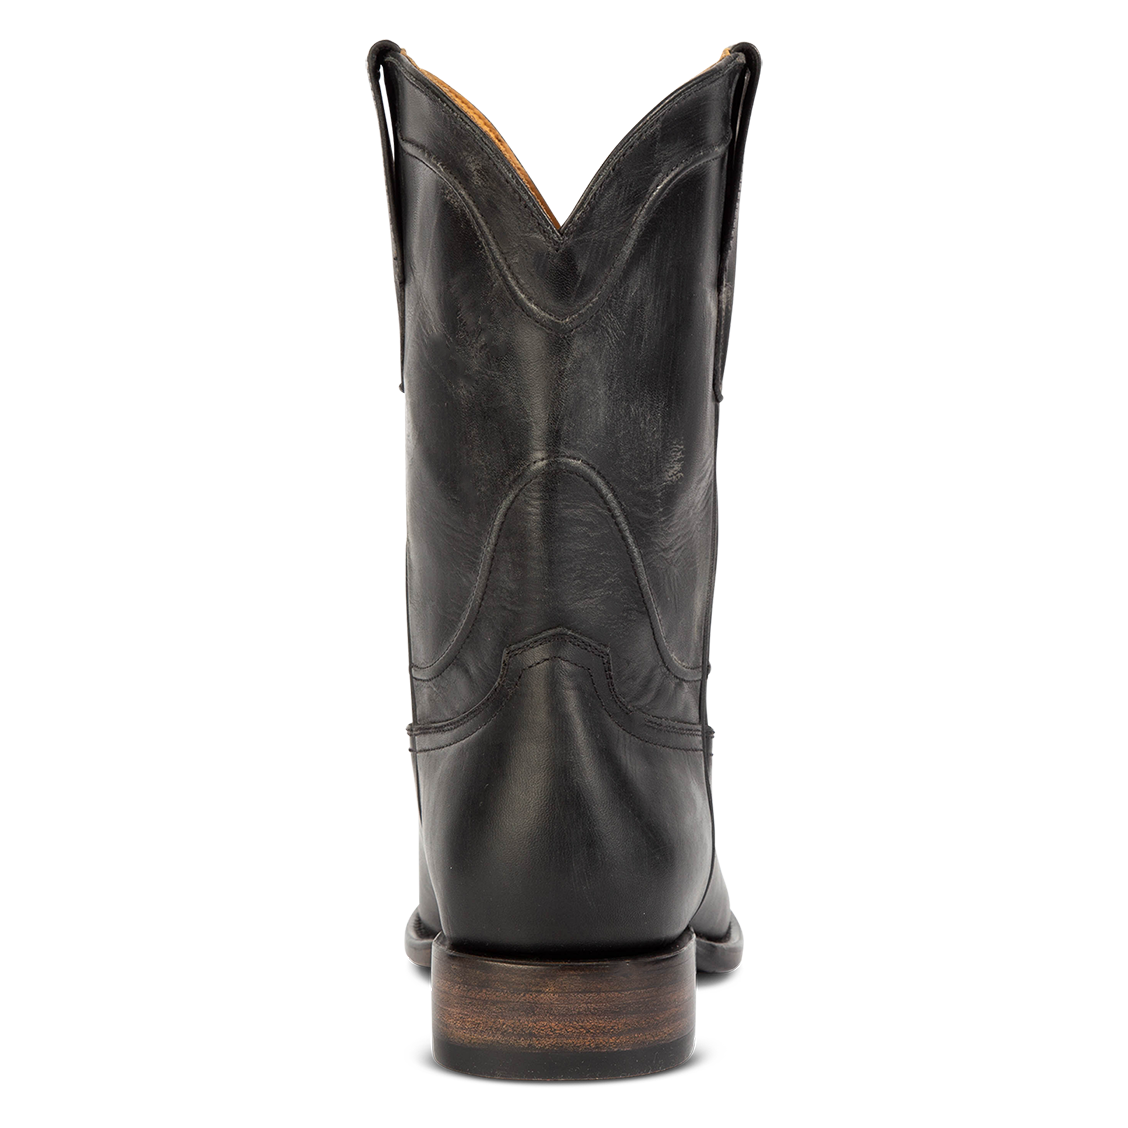 Back view showing shaft detailing on FREEBIRD men's Outlaw black boot